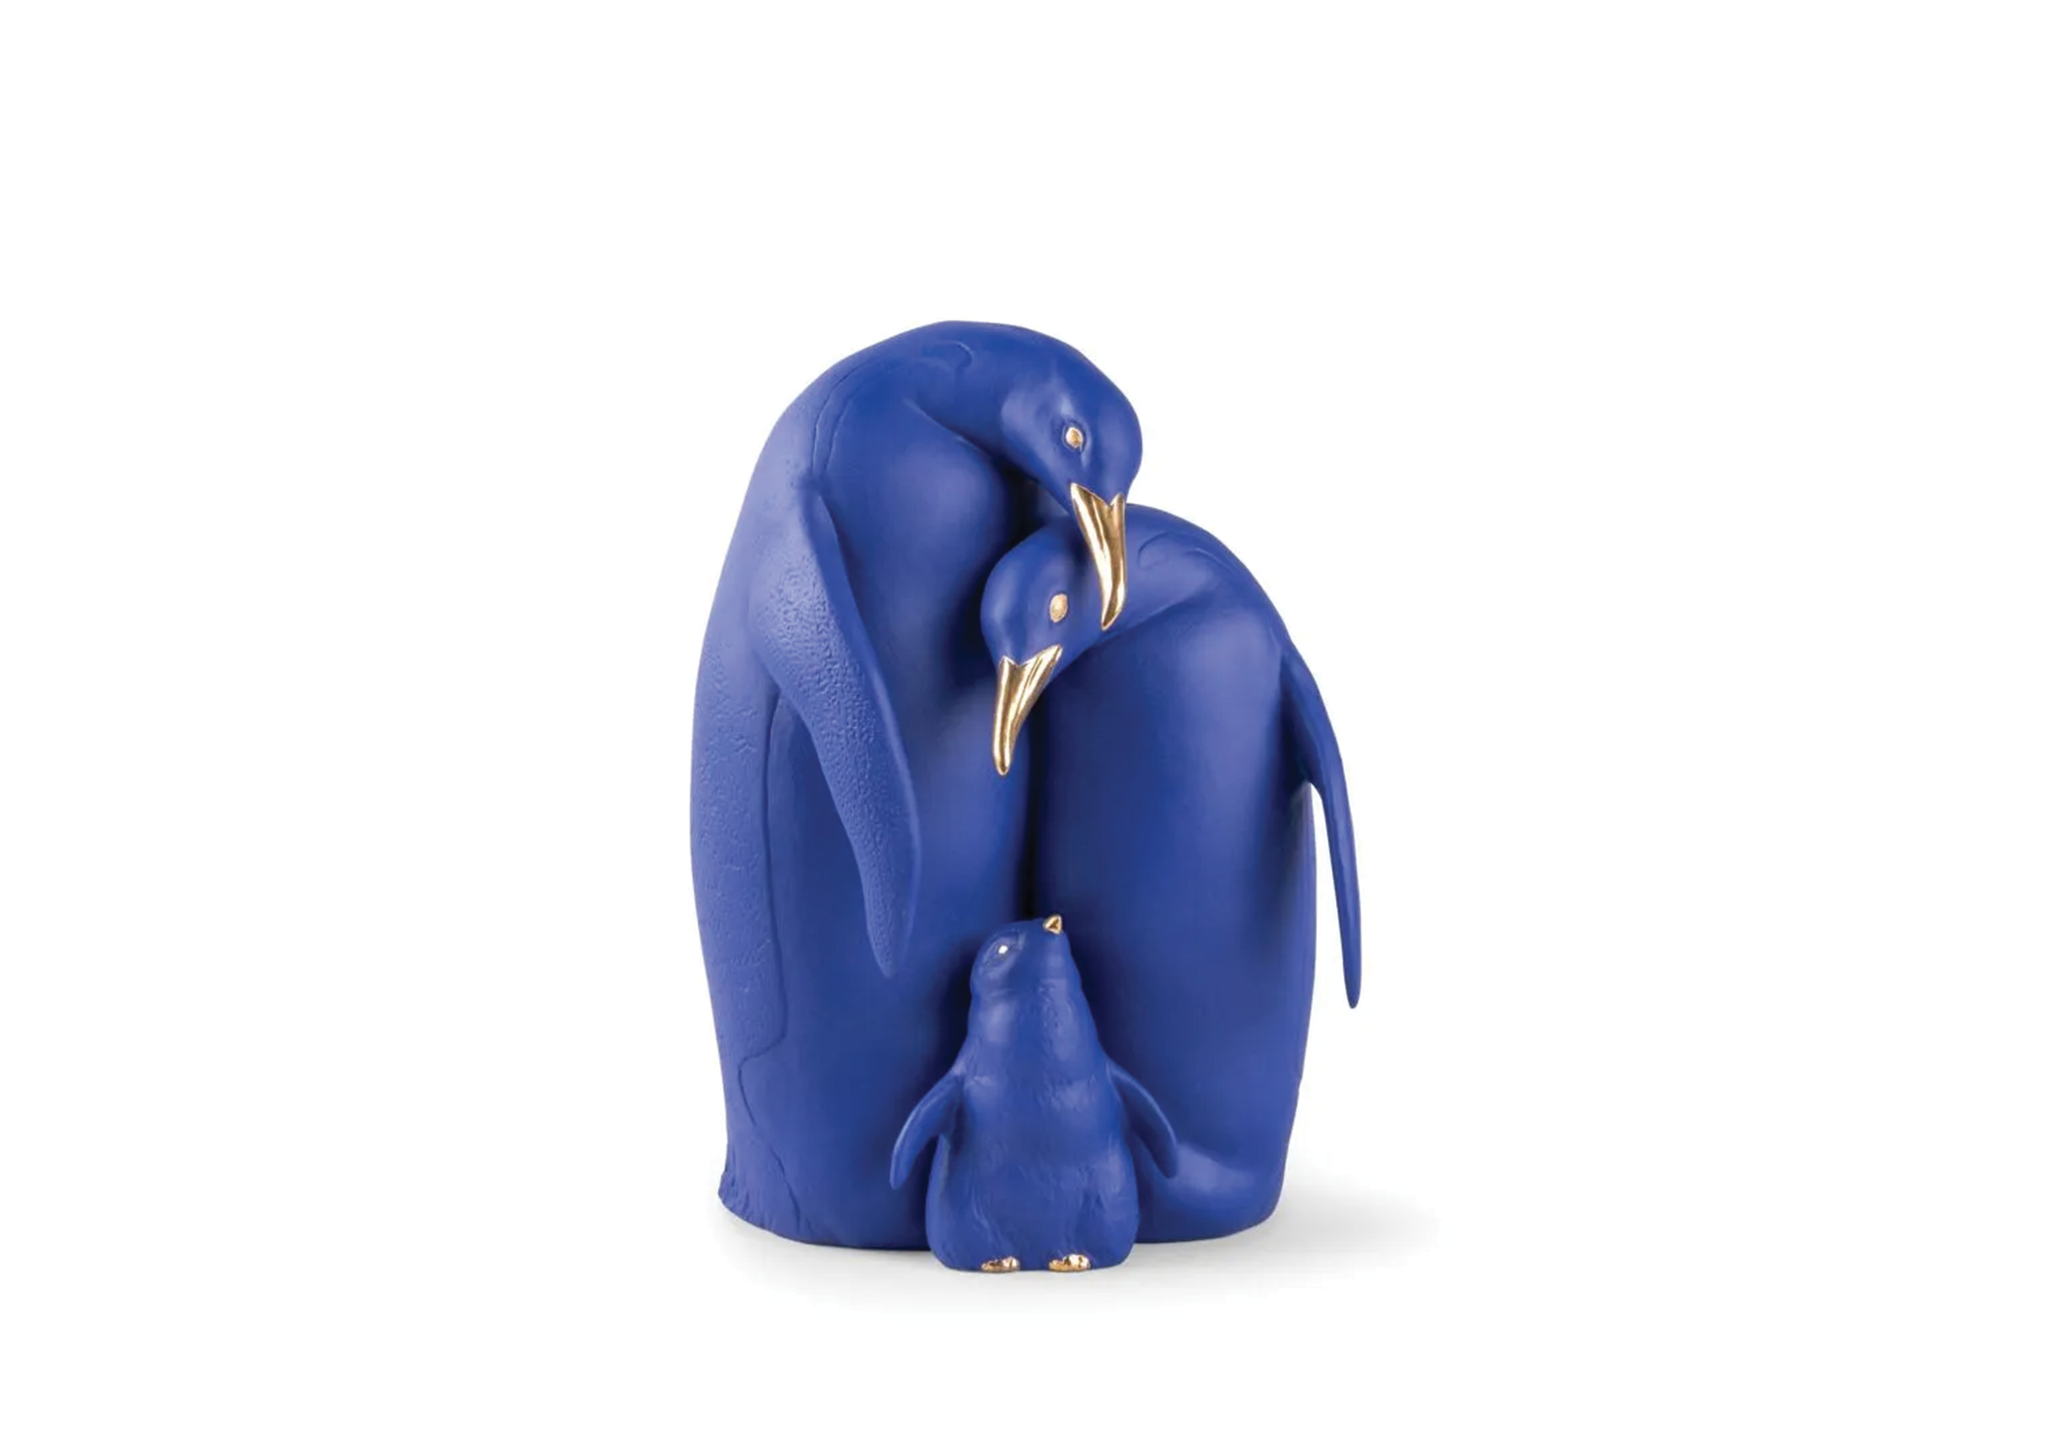 Penguin family Sculpture. Limited Edition. Blue and Gold